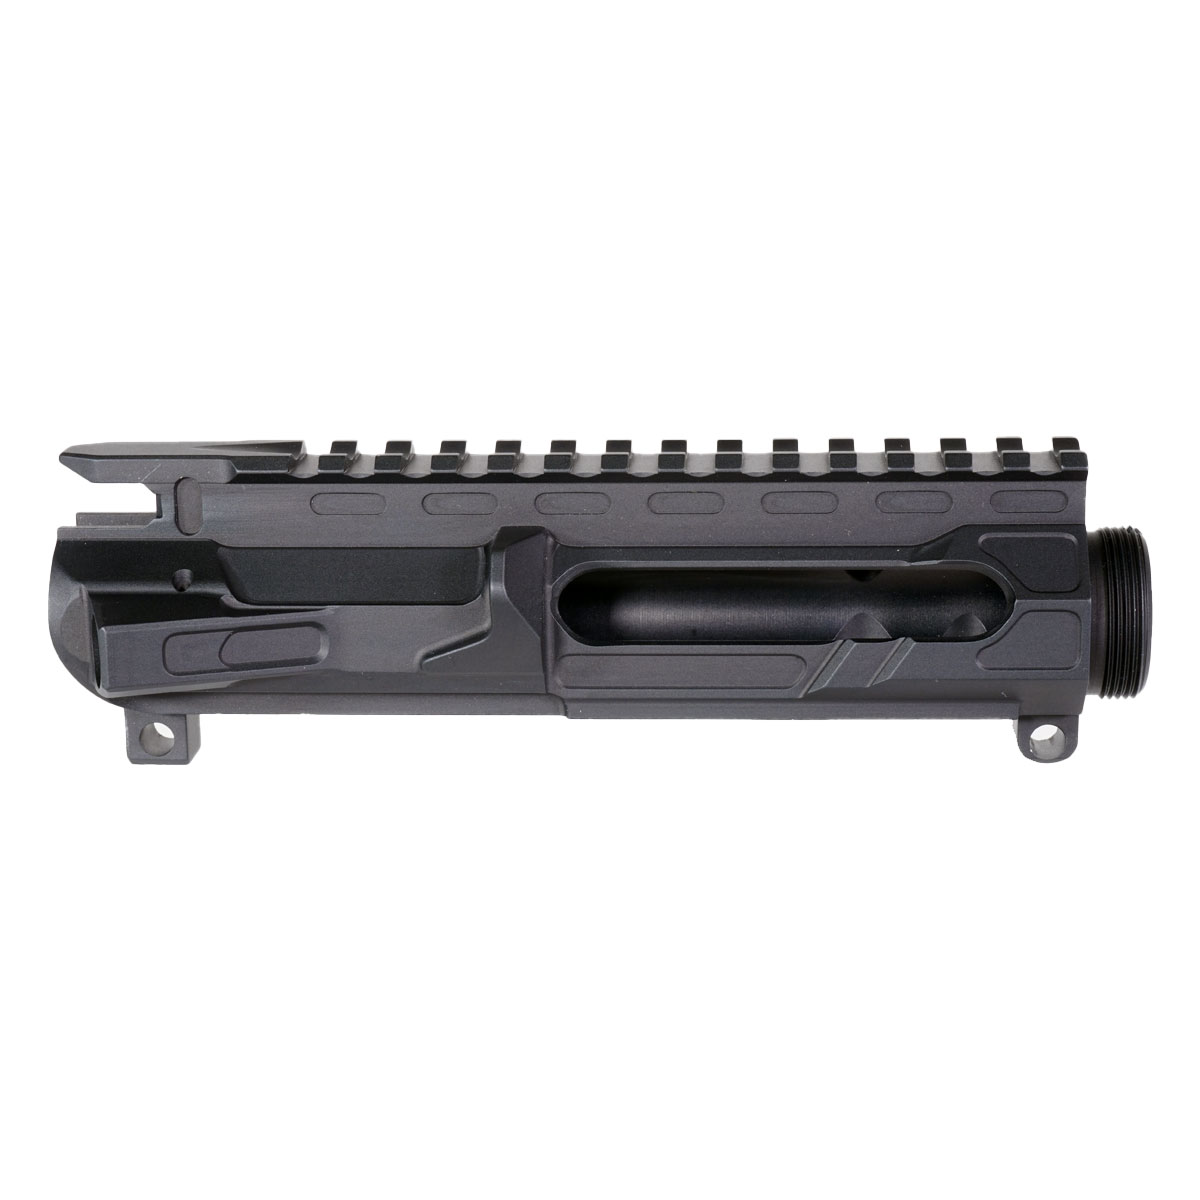 3rd Gen Tactical AR-15 Stripped Billet Upper Receiver w/ Dished Pic Rail, Black Anodized